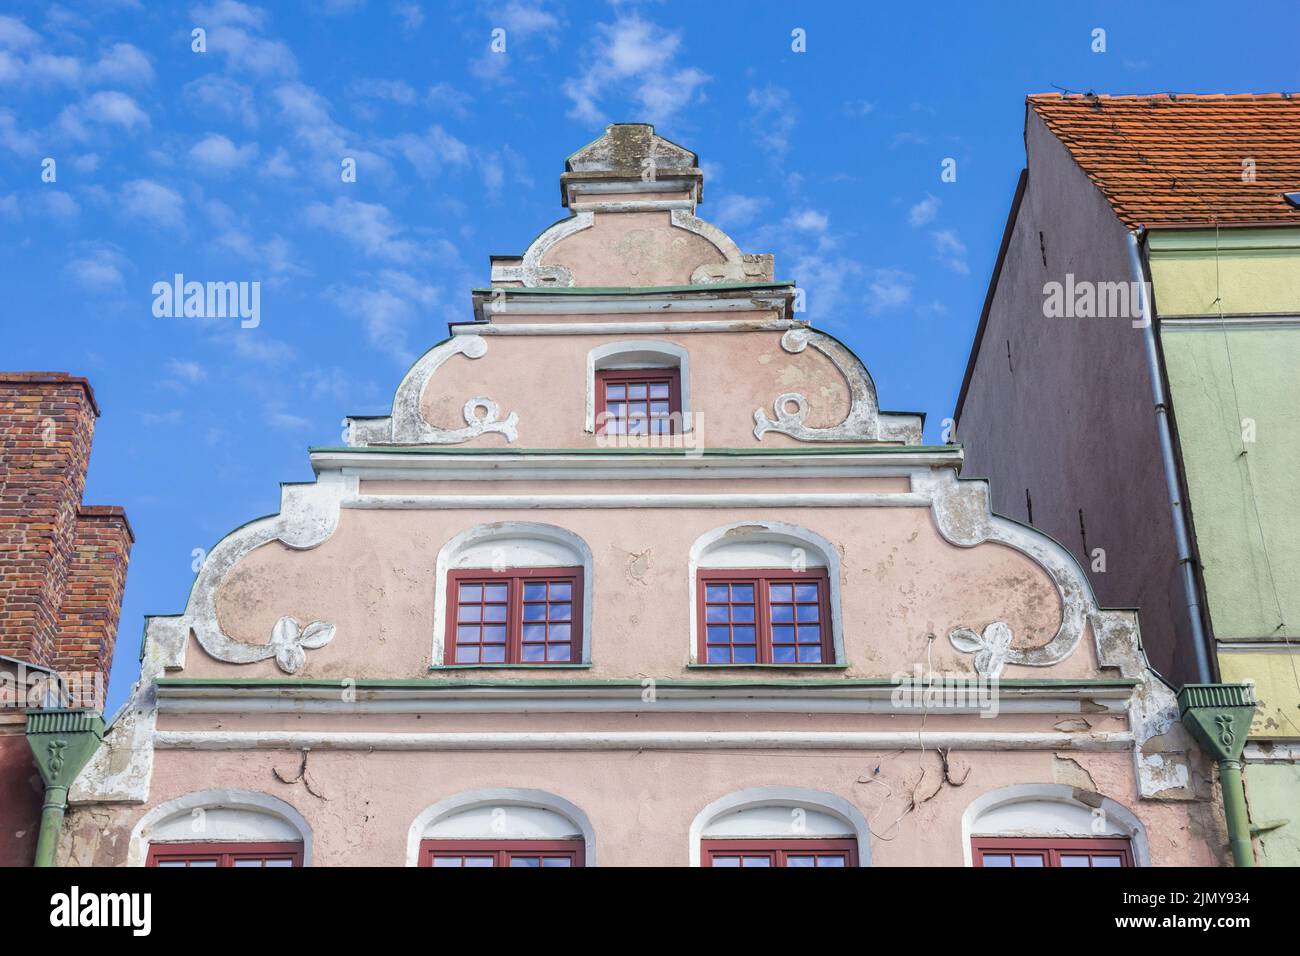 Decorated facade of an old house in Trzebiatow, Poland Stock Photo